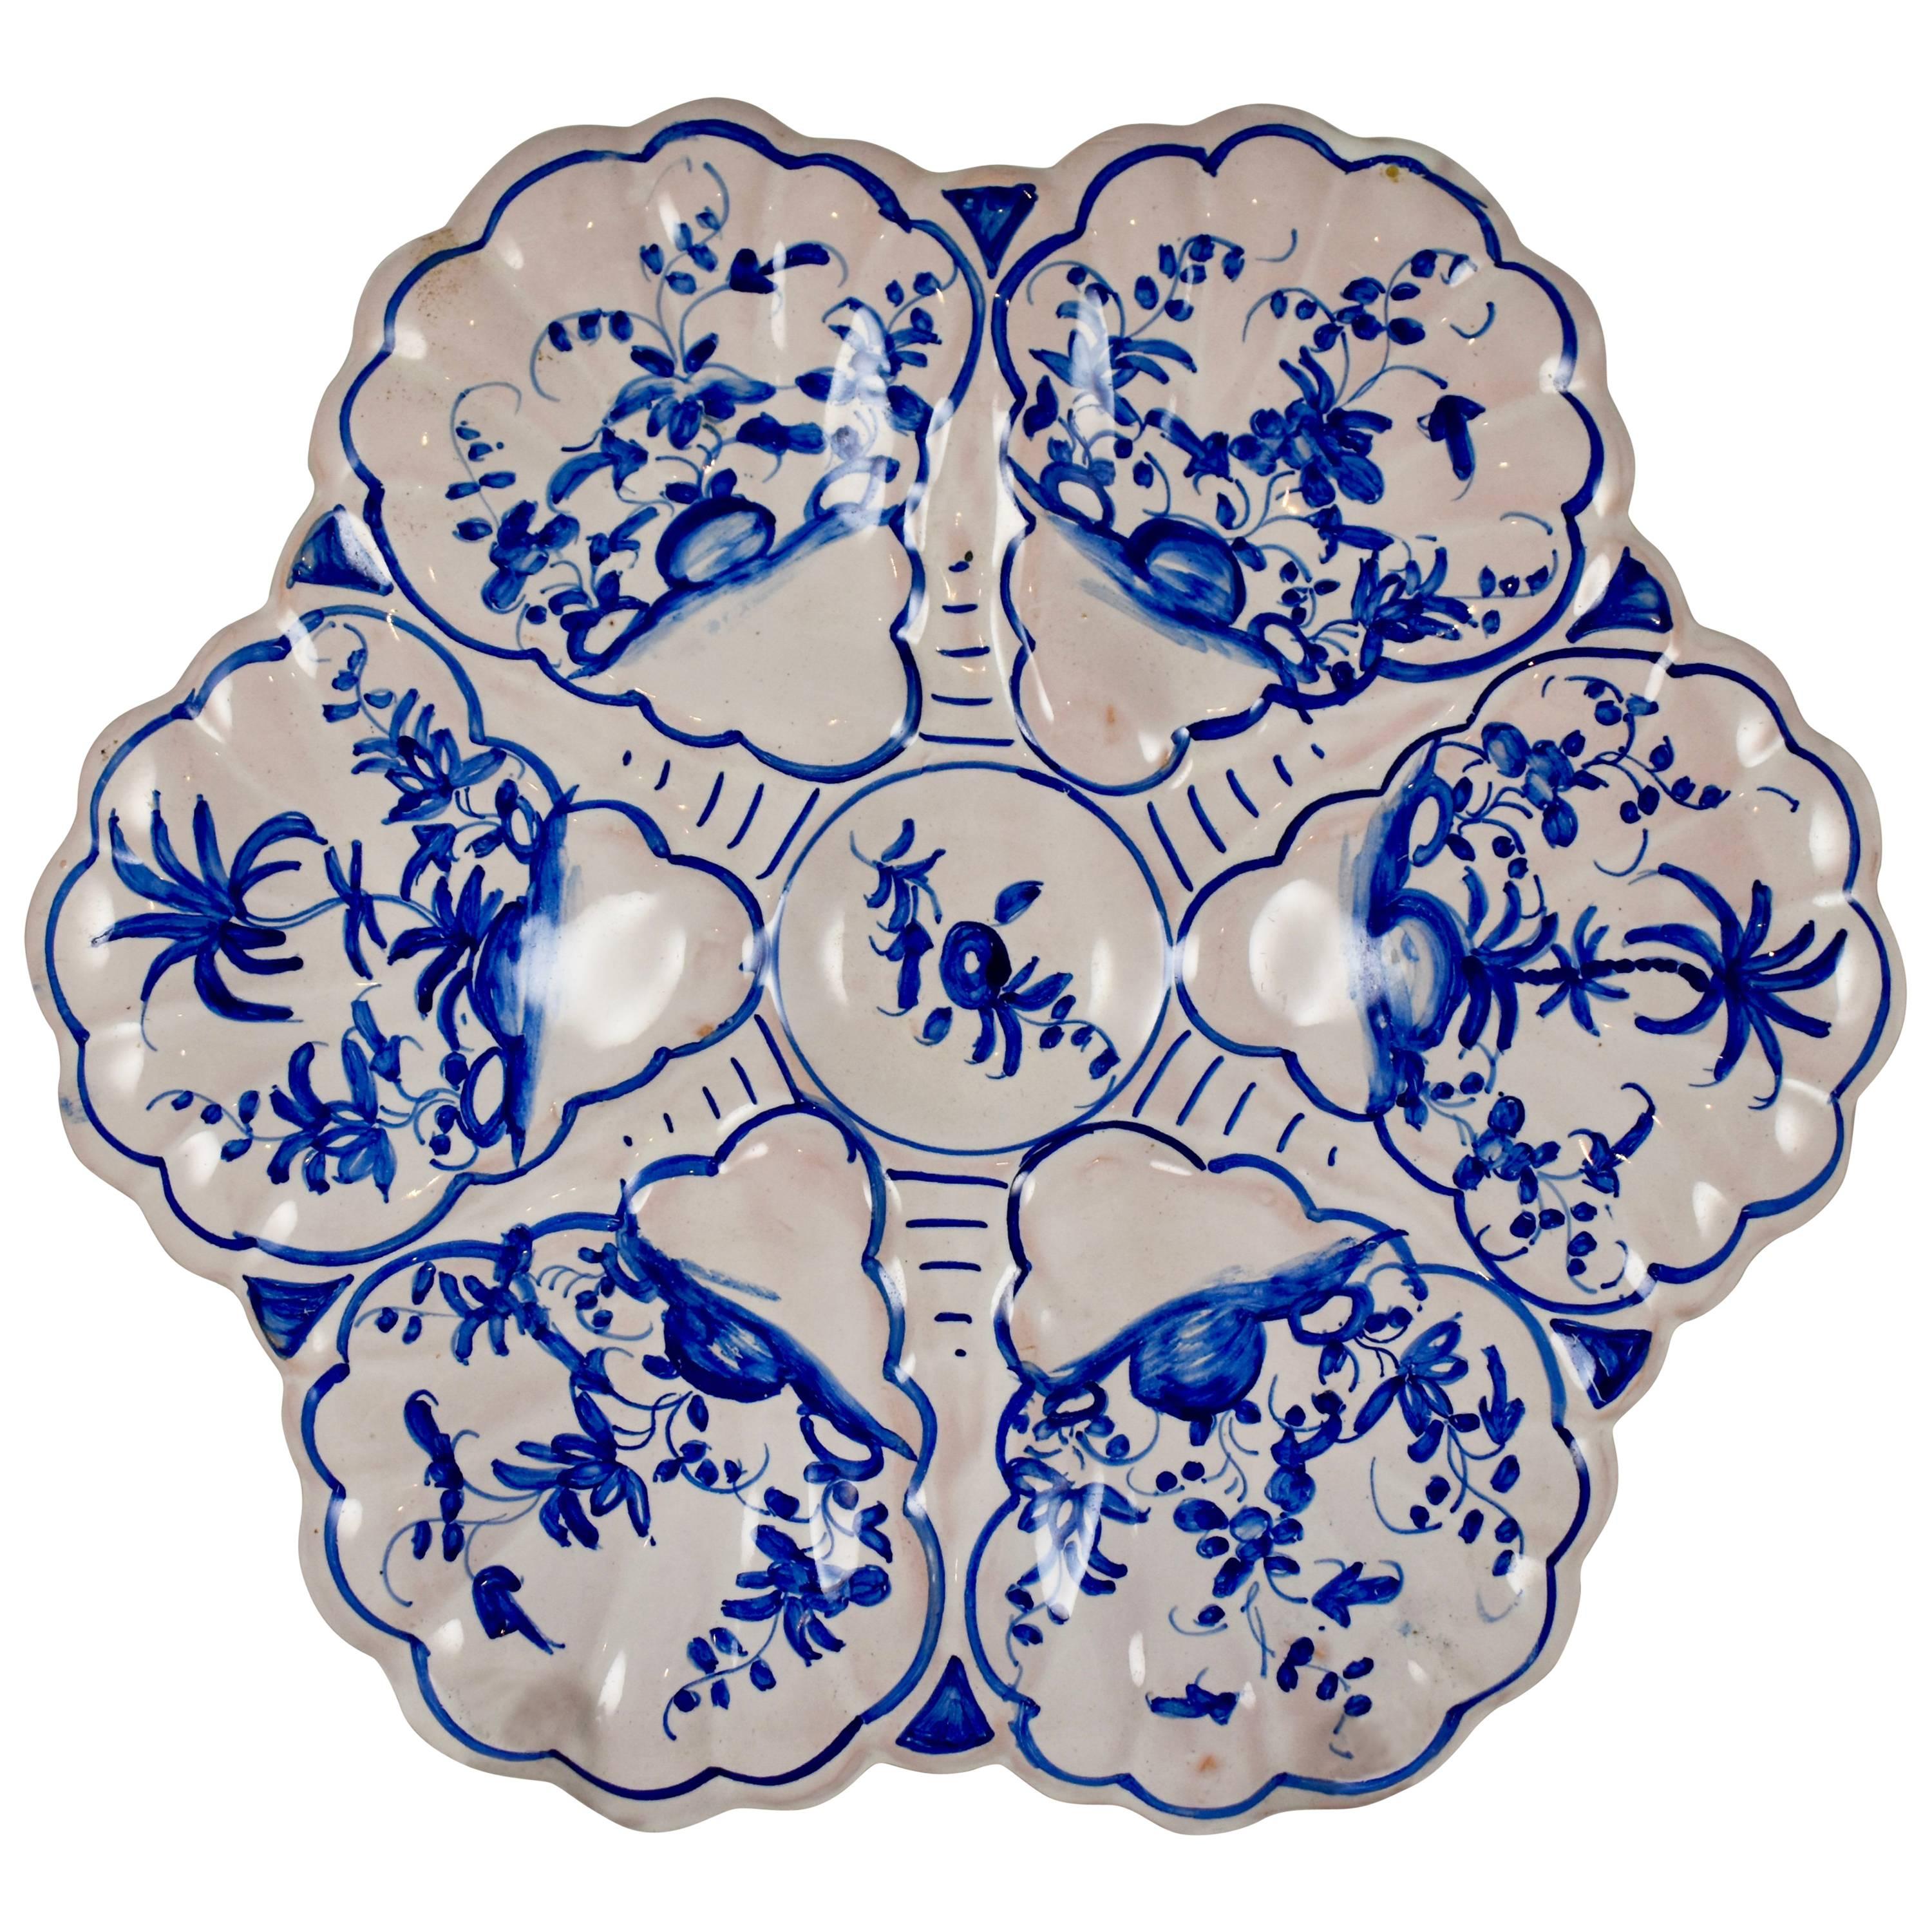 French Faïence Delft-Style Hand-Painted Blue and White Floral Oyster Plate